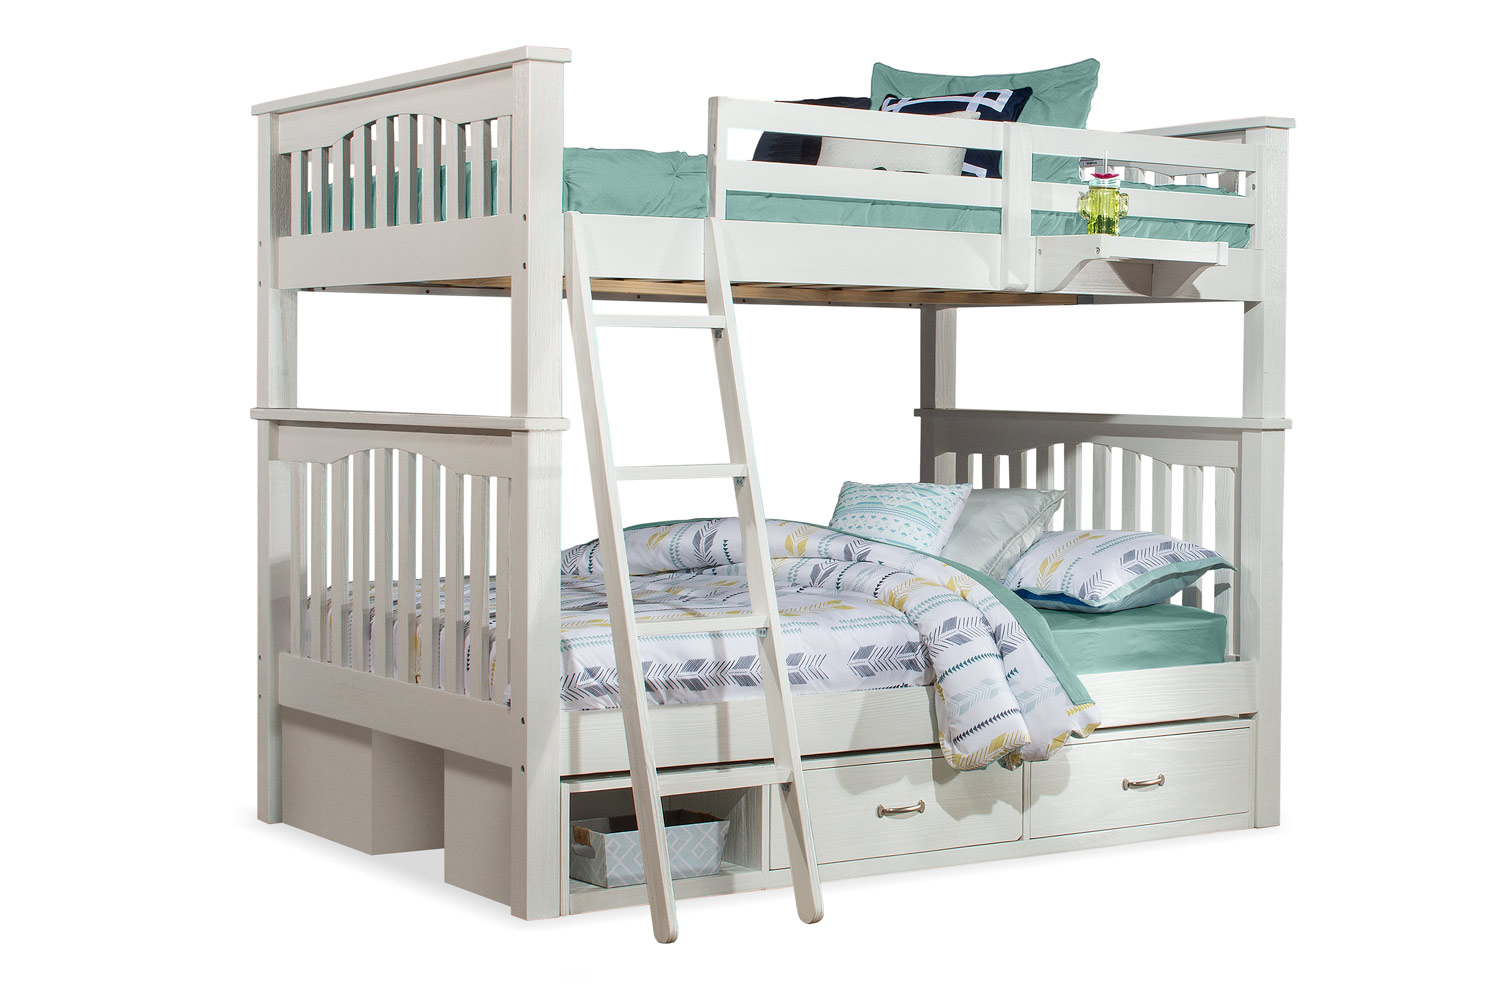 NE Kids Highlands Harper Full/Full Bunk Bed with (2) Storage Units and Hanging Nightstand - White Finish